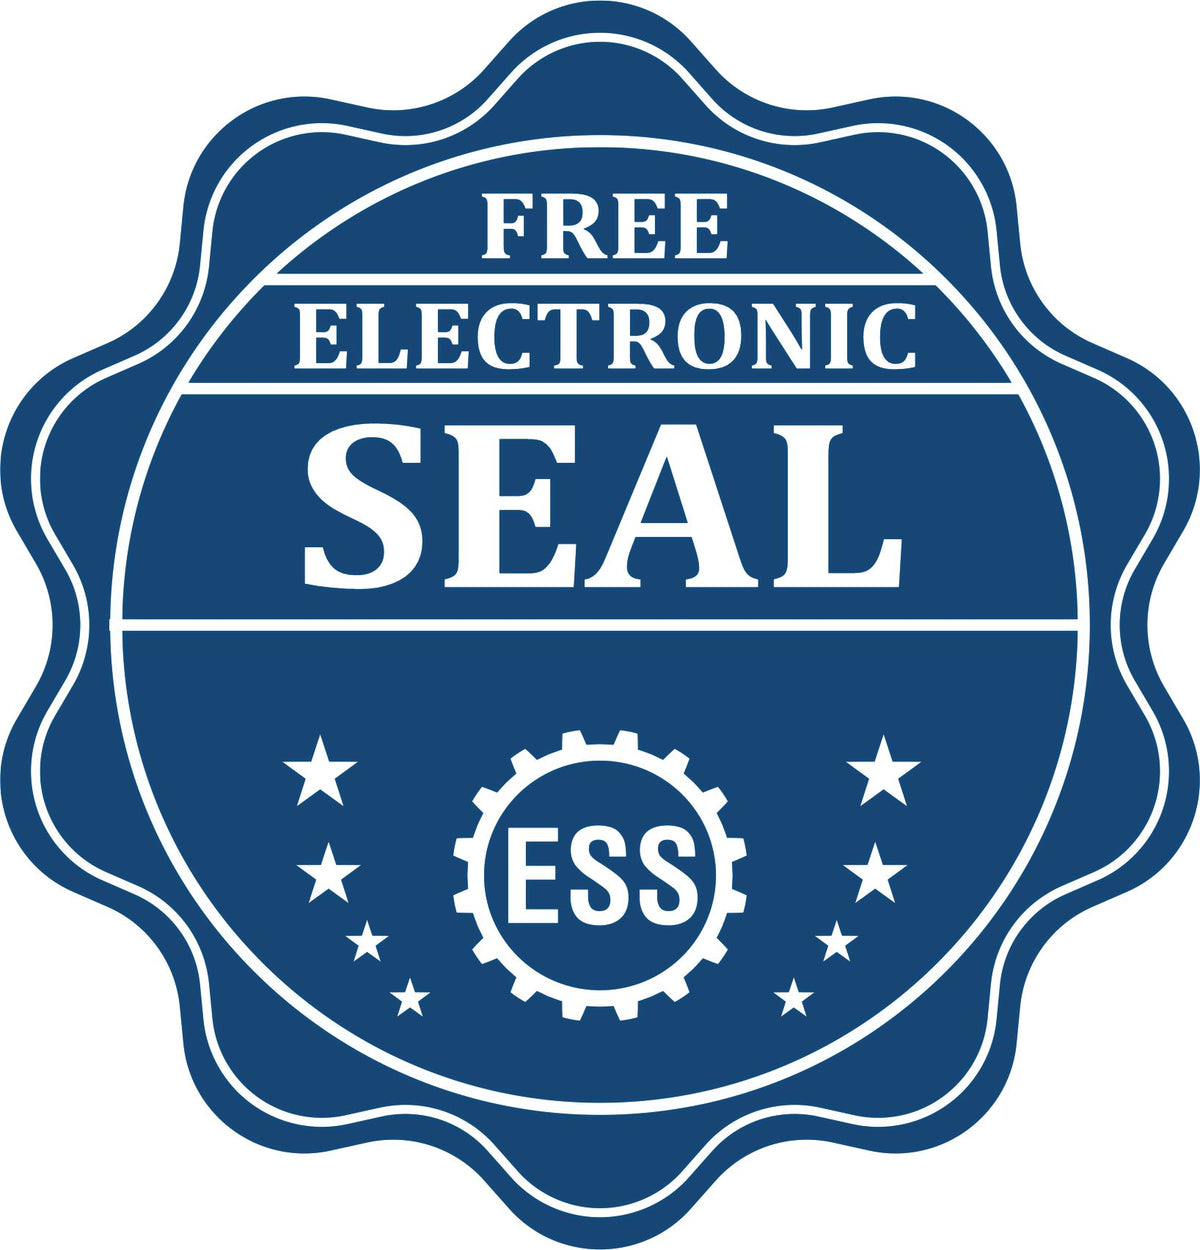 A badge showing a free electronic seal for the Super Slim Indiana Notary Public Stamp with stars and the ESS gear on the emblem.